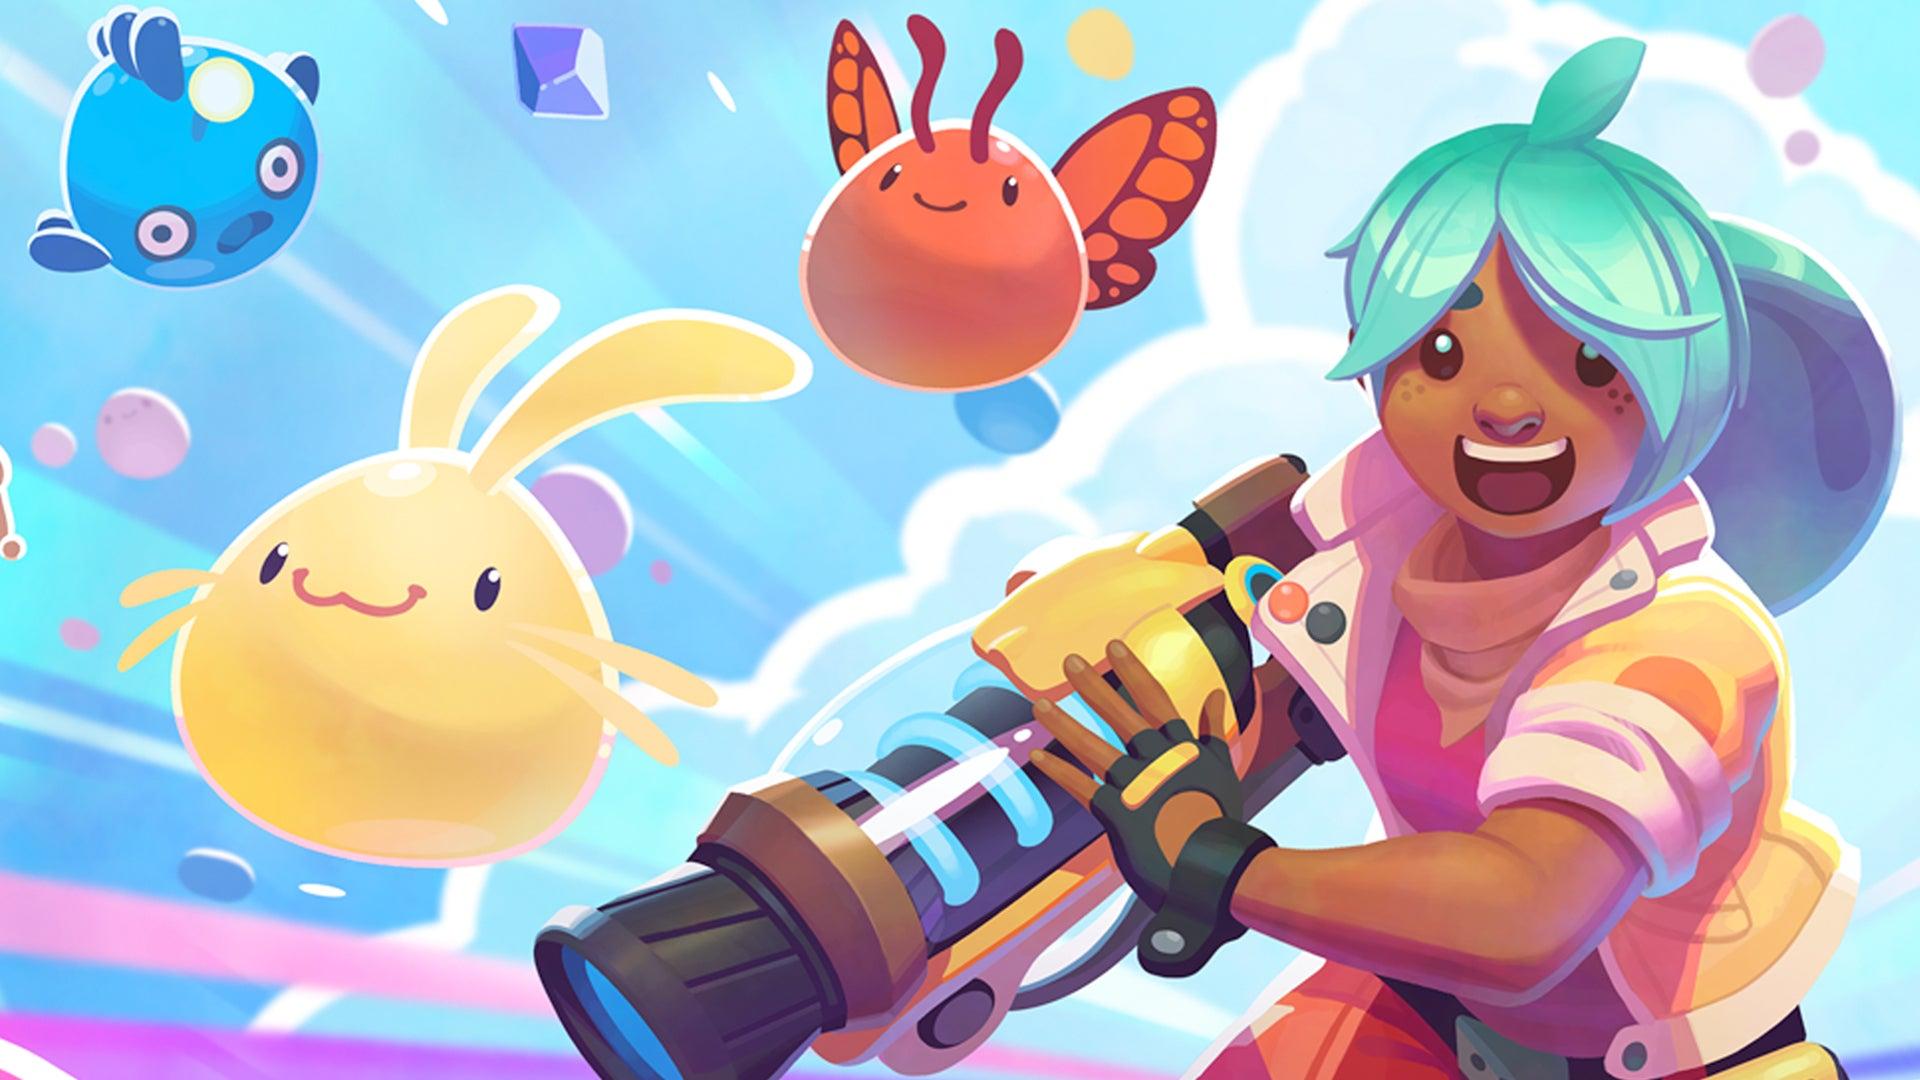 Is Slime Rancher 2 Coming To PS5 And PS4? - PlayStation Universe